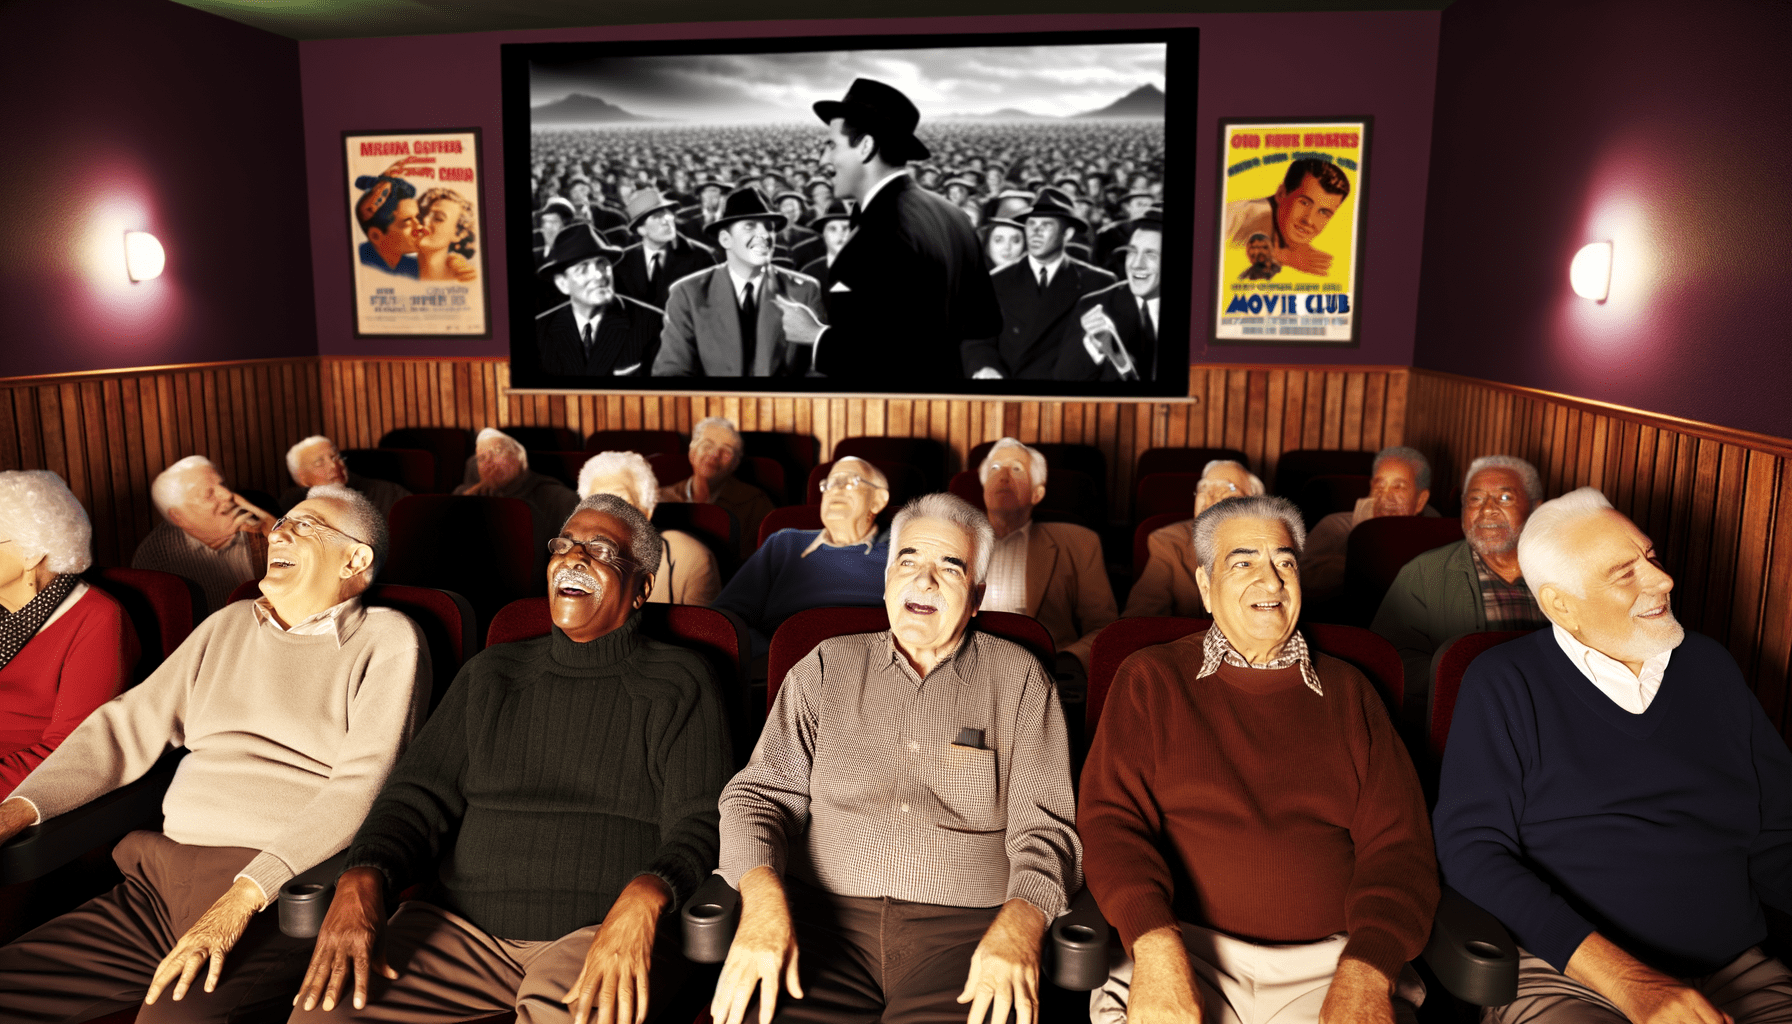 The Silver Screen: Movie Clubs for Film-Loving Seniors